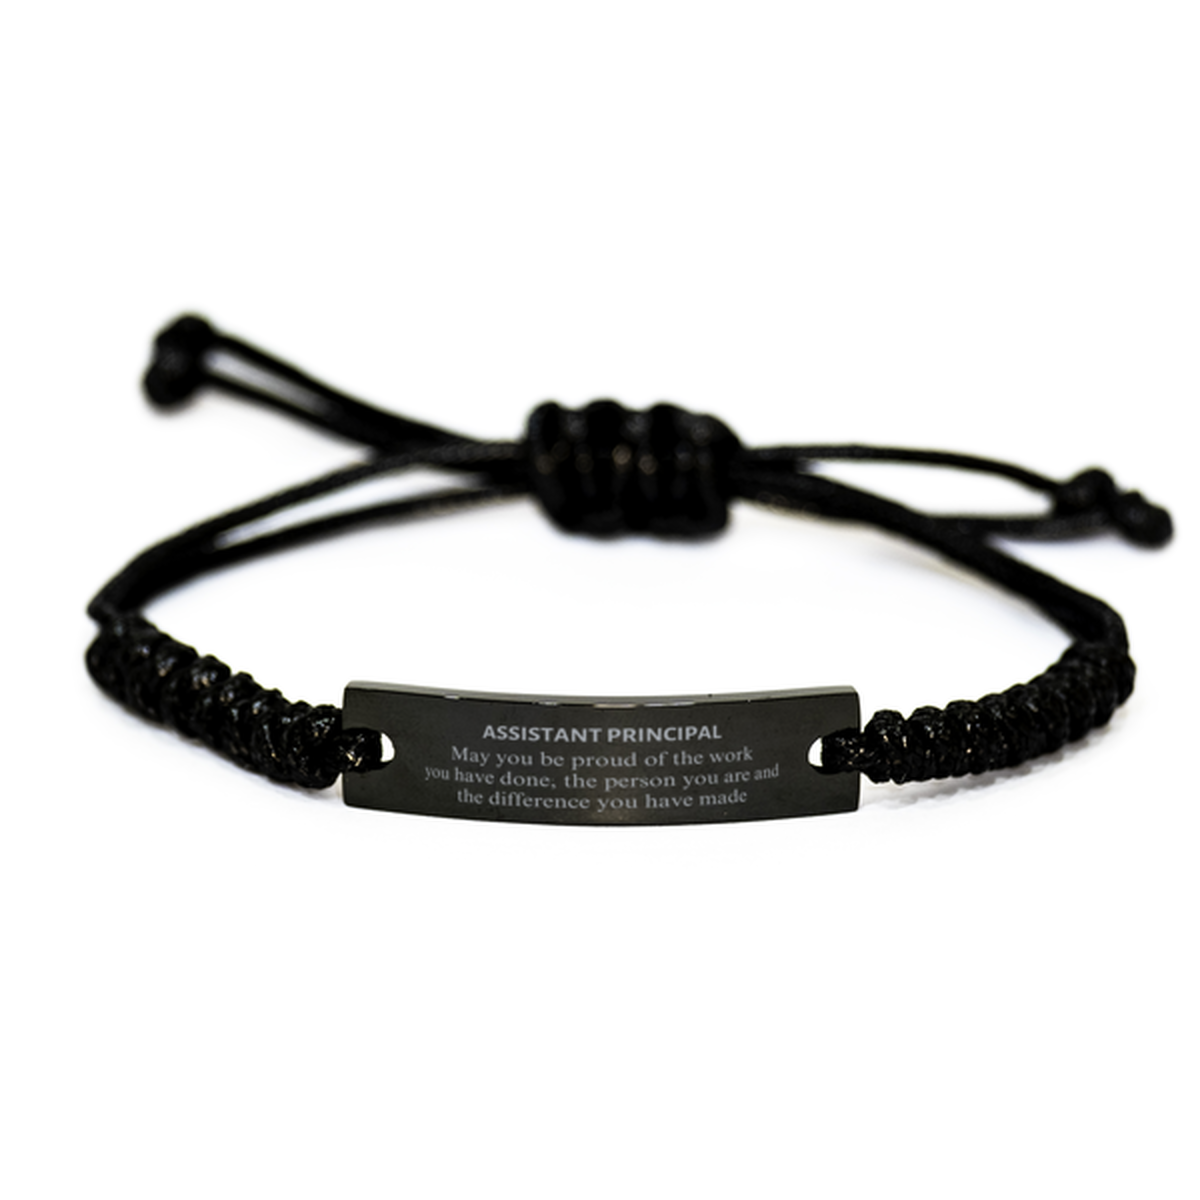 Assistant Principal May you be proud of the work you have done, Retirement Assistant Principal Black Rope Bracelet for Colleague Appreciation Gifts Amazing for Assistant Principal